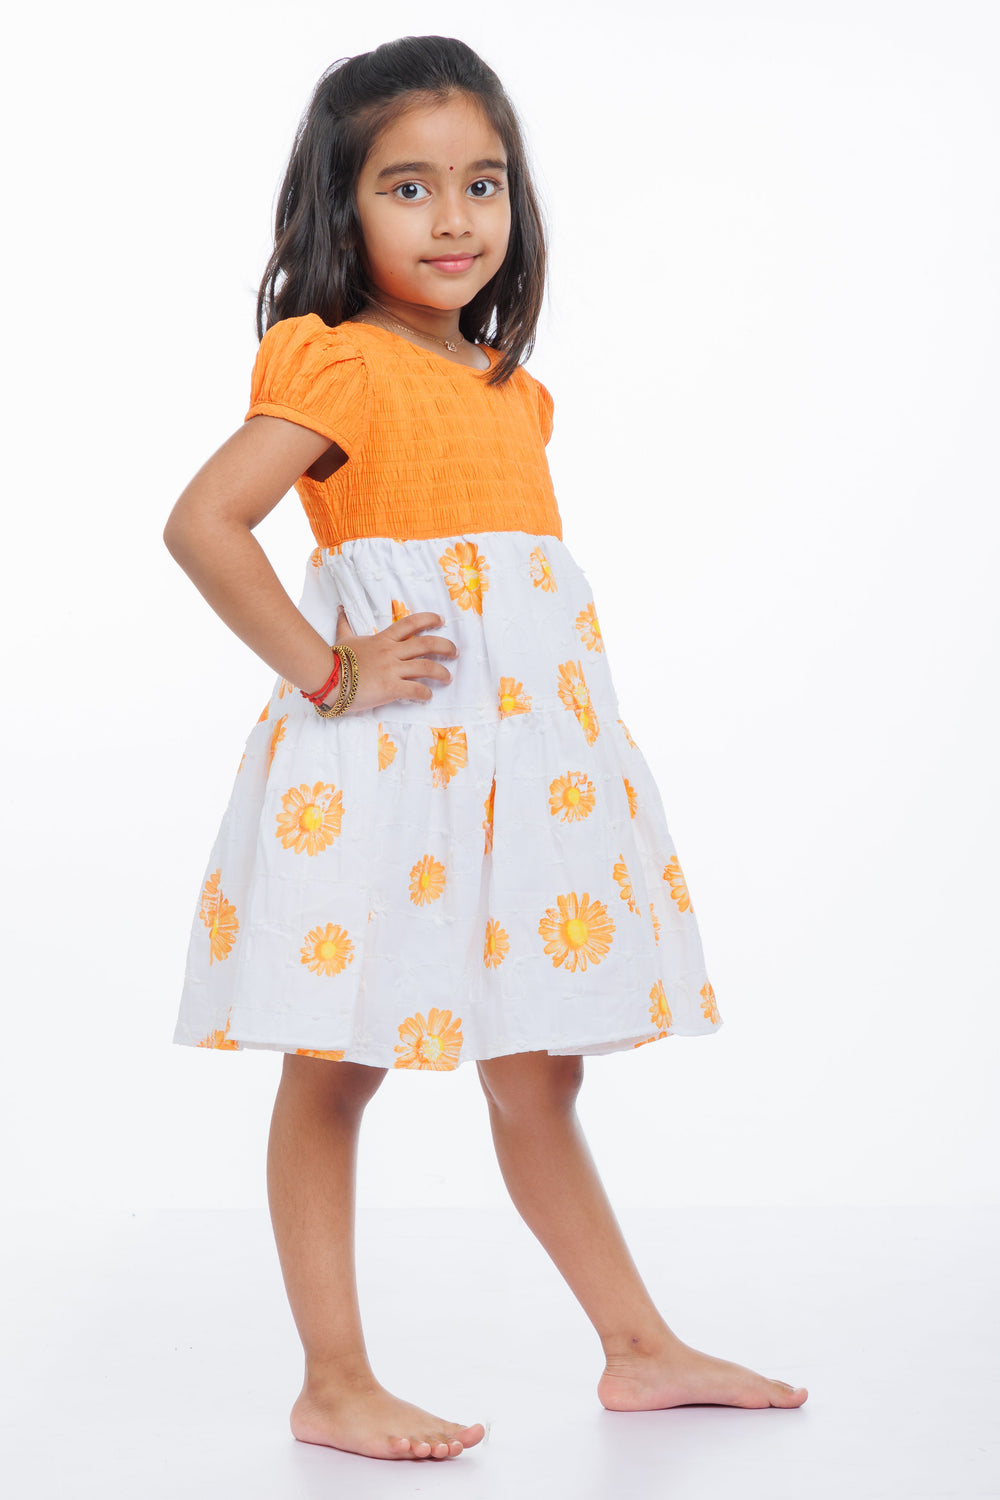 The Nesavu Girls Cotton Frock Sunkissed Delight Orange Cotton Frock with Floral Print for Girls Nesavu Girls Orange Floral Pure Cotton Summer Frock | Comfortable & Stylish | The Nesavu